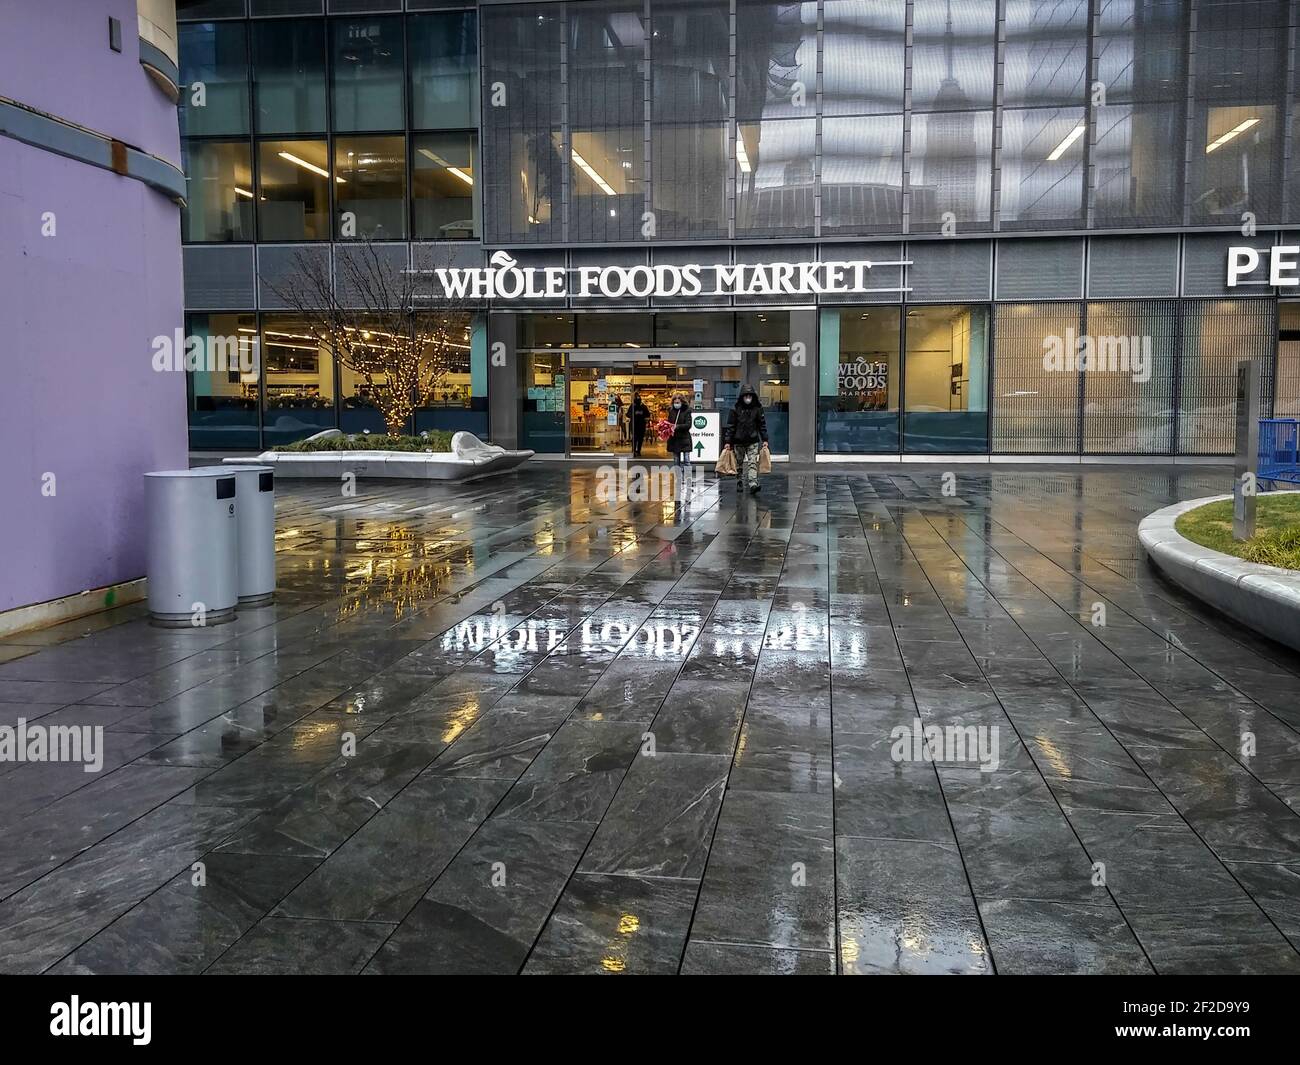 https://c8.alamy.com/comp/2F2D9Y9/customers-exit-and-enter-the-whole-foods-manhattan-west-in-the-hudson-yards-neighborhood-of-new-york-on-sunday-february-28-2021-richard-b-levine-2F2D9Y9.jpg